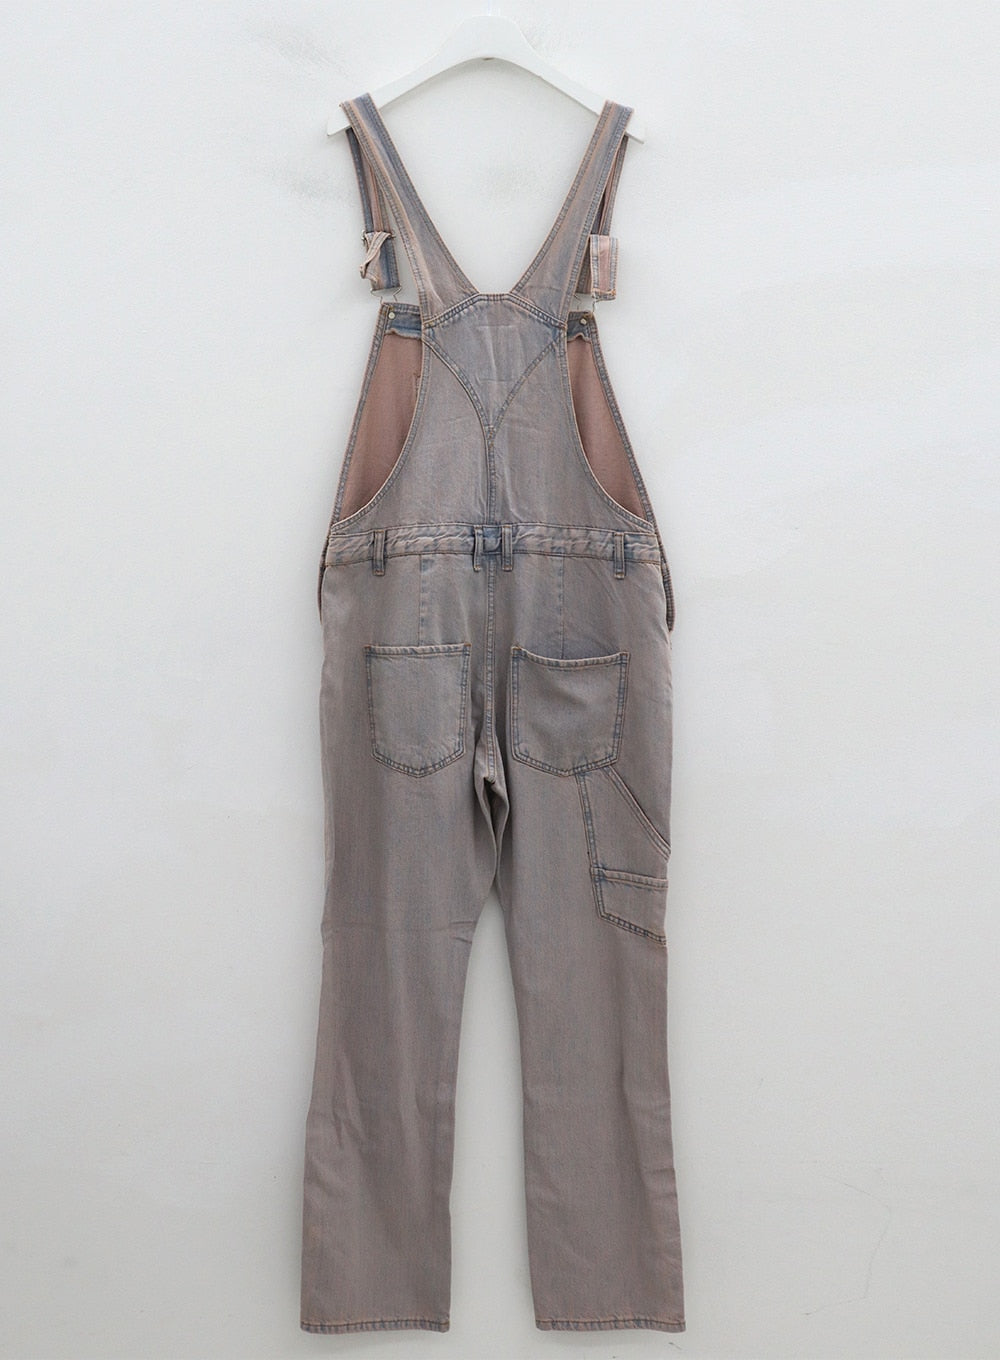 Little One Limited - Size 2 Cotton On light pink denim overalls now $5 |  Facebook